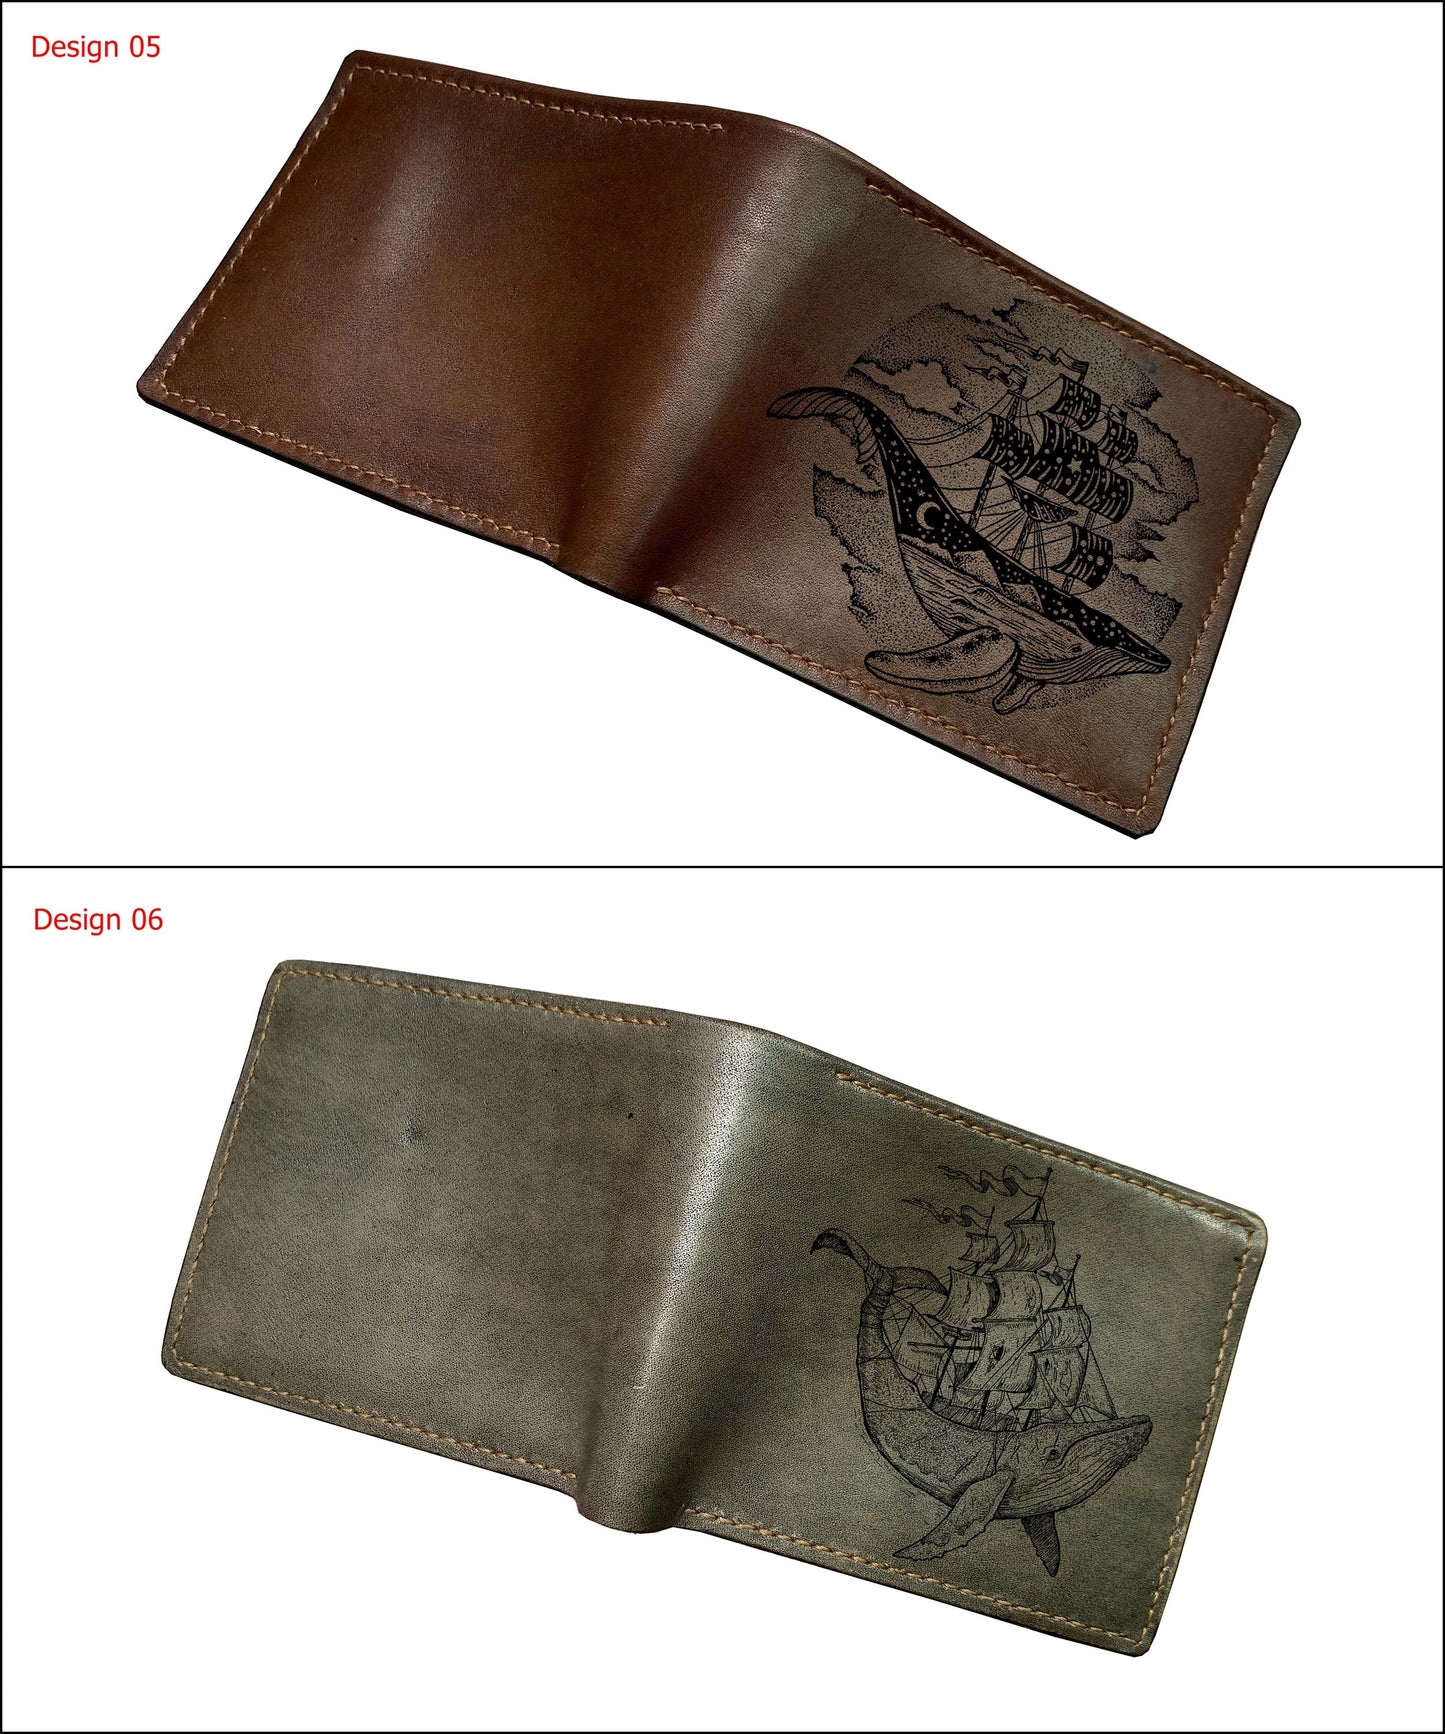 Mayan Corner - Personalized genuine leather wallet, whale pattern present, fish animal art, wedding present idea for him